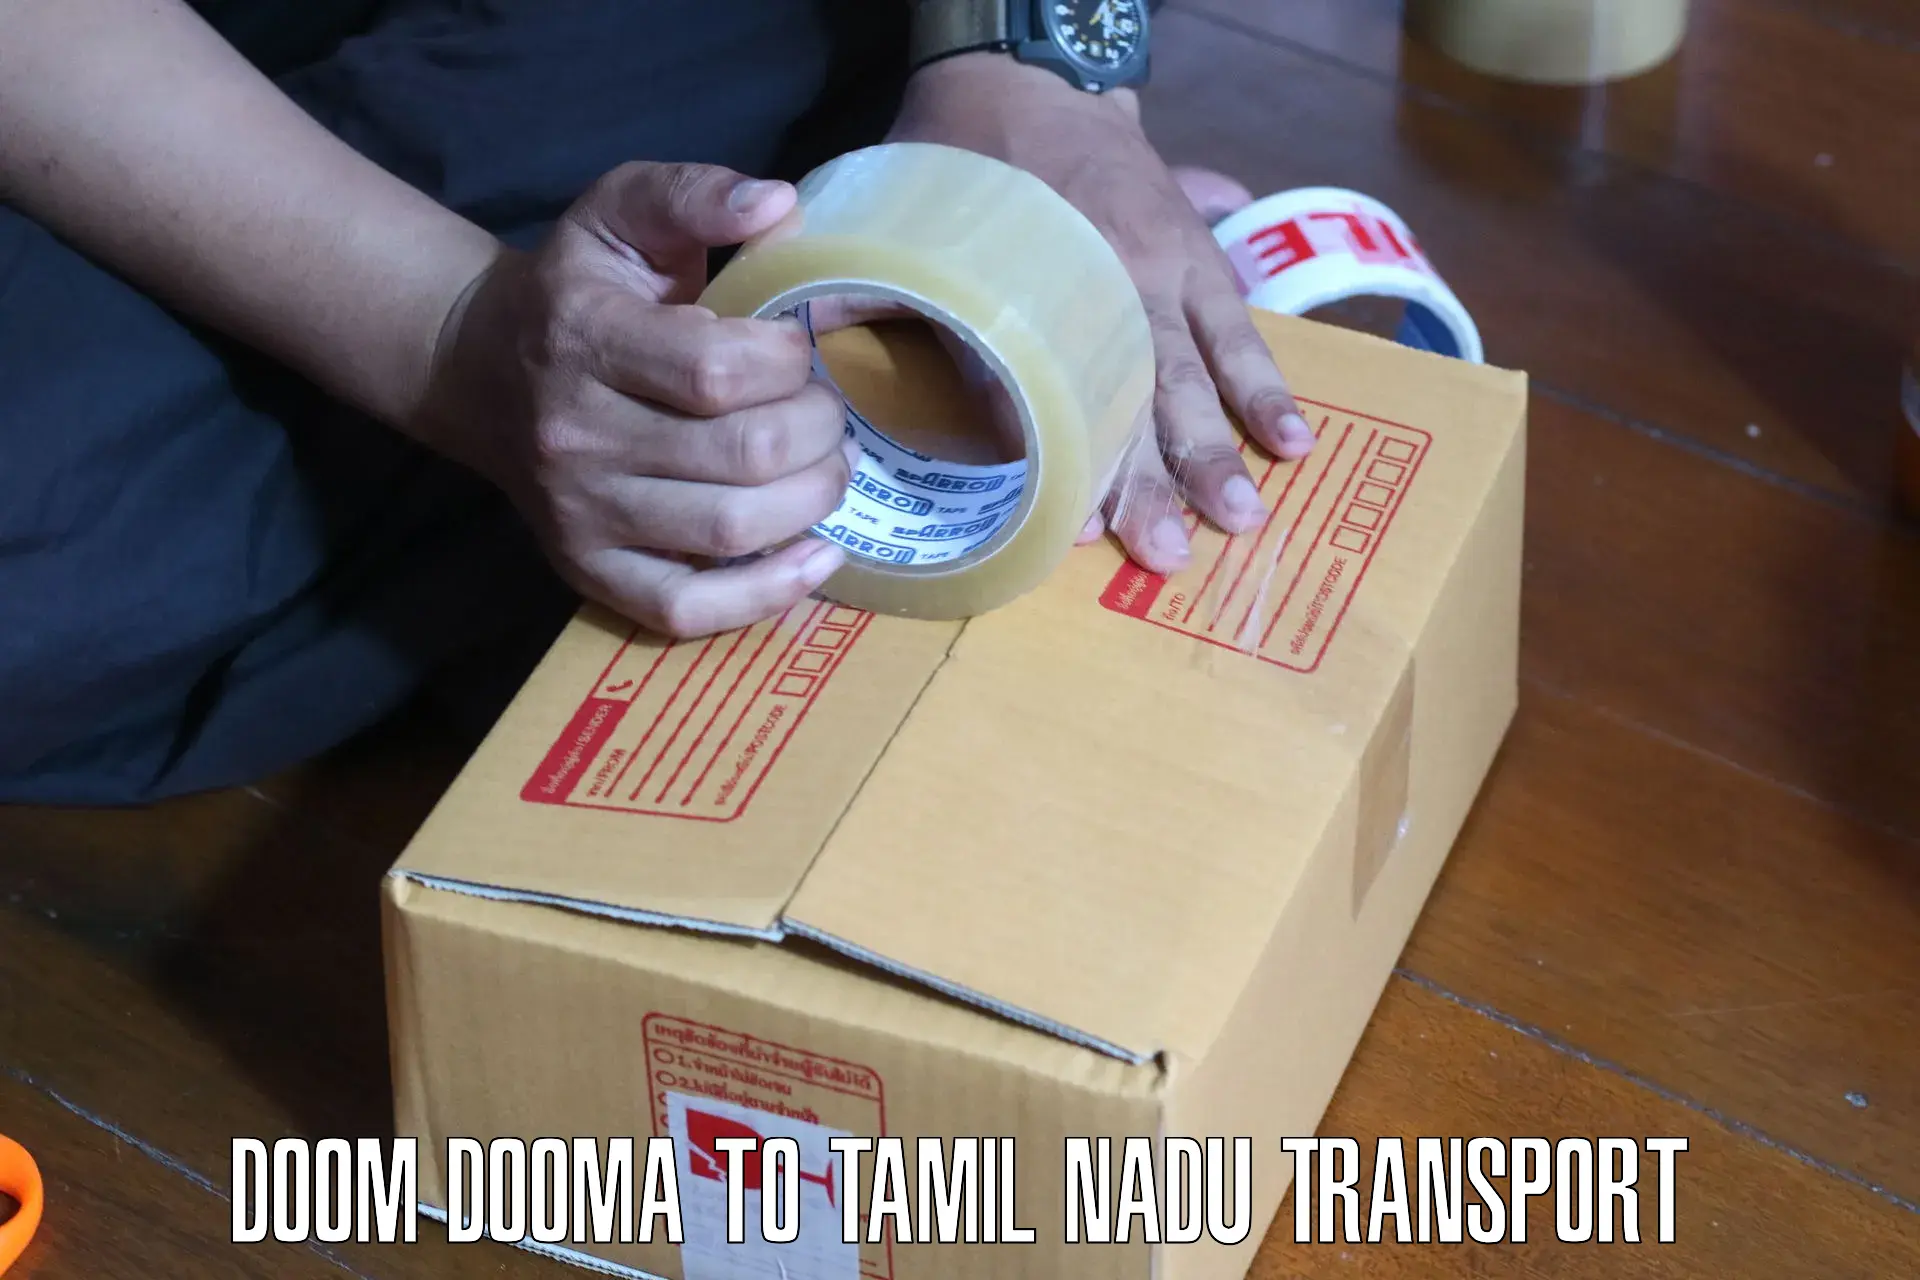 Interstate transport services Doom Dooma to Ooty